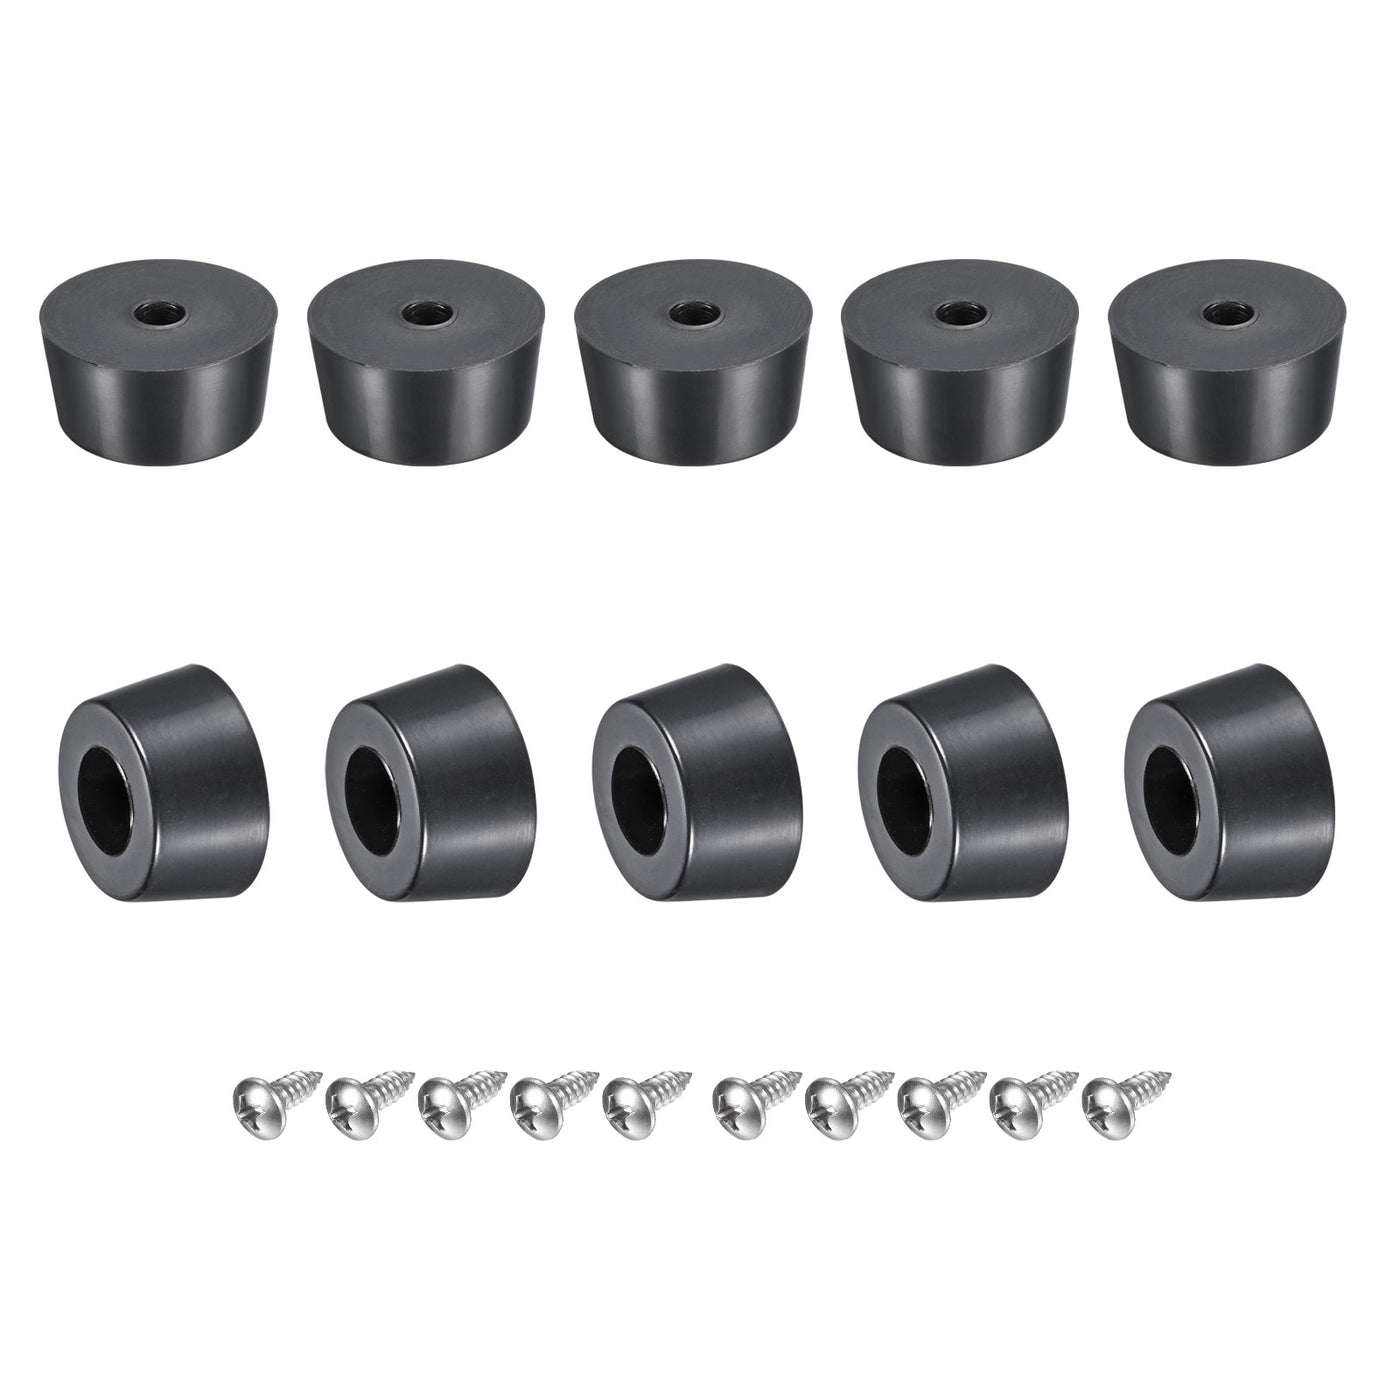 uxcell Uxcell Rubber Bumper Feet, 0.47" H x 0.98" W Round Pads with Stainless Steel Washer and Screws for Furniture, Appliances, Electronics 16 Pcs